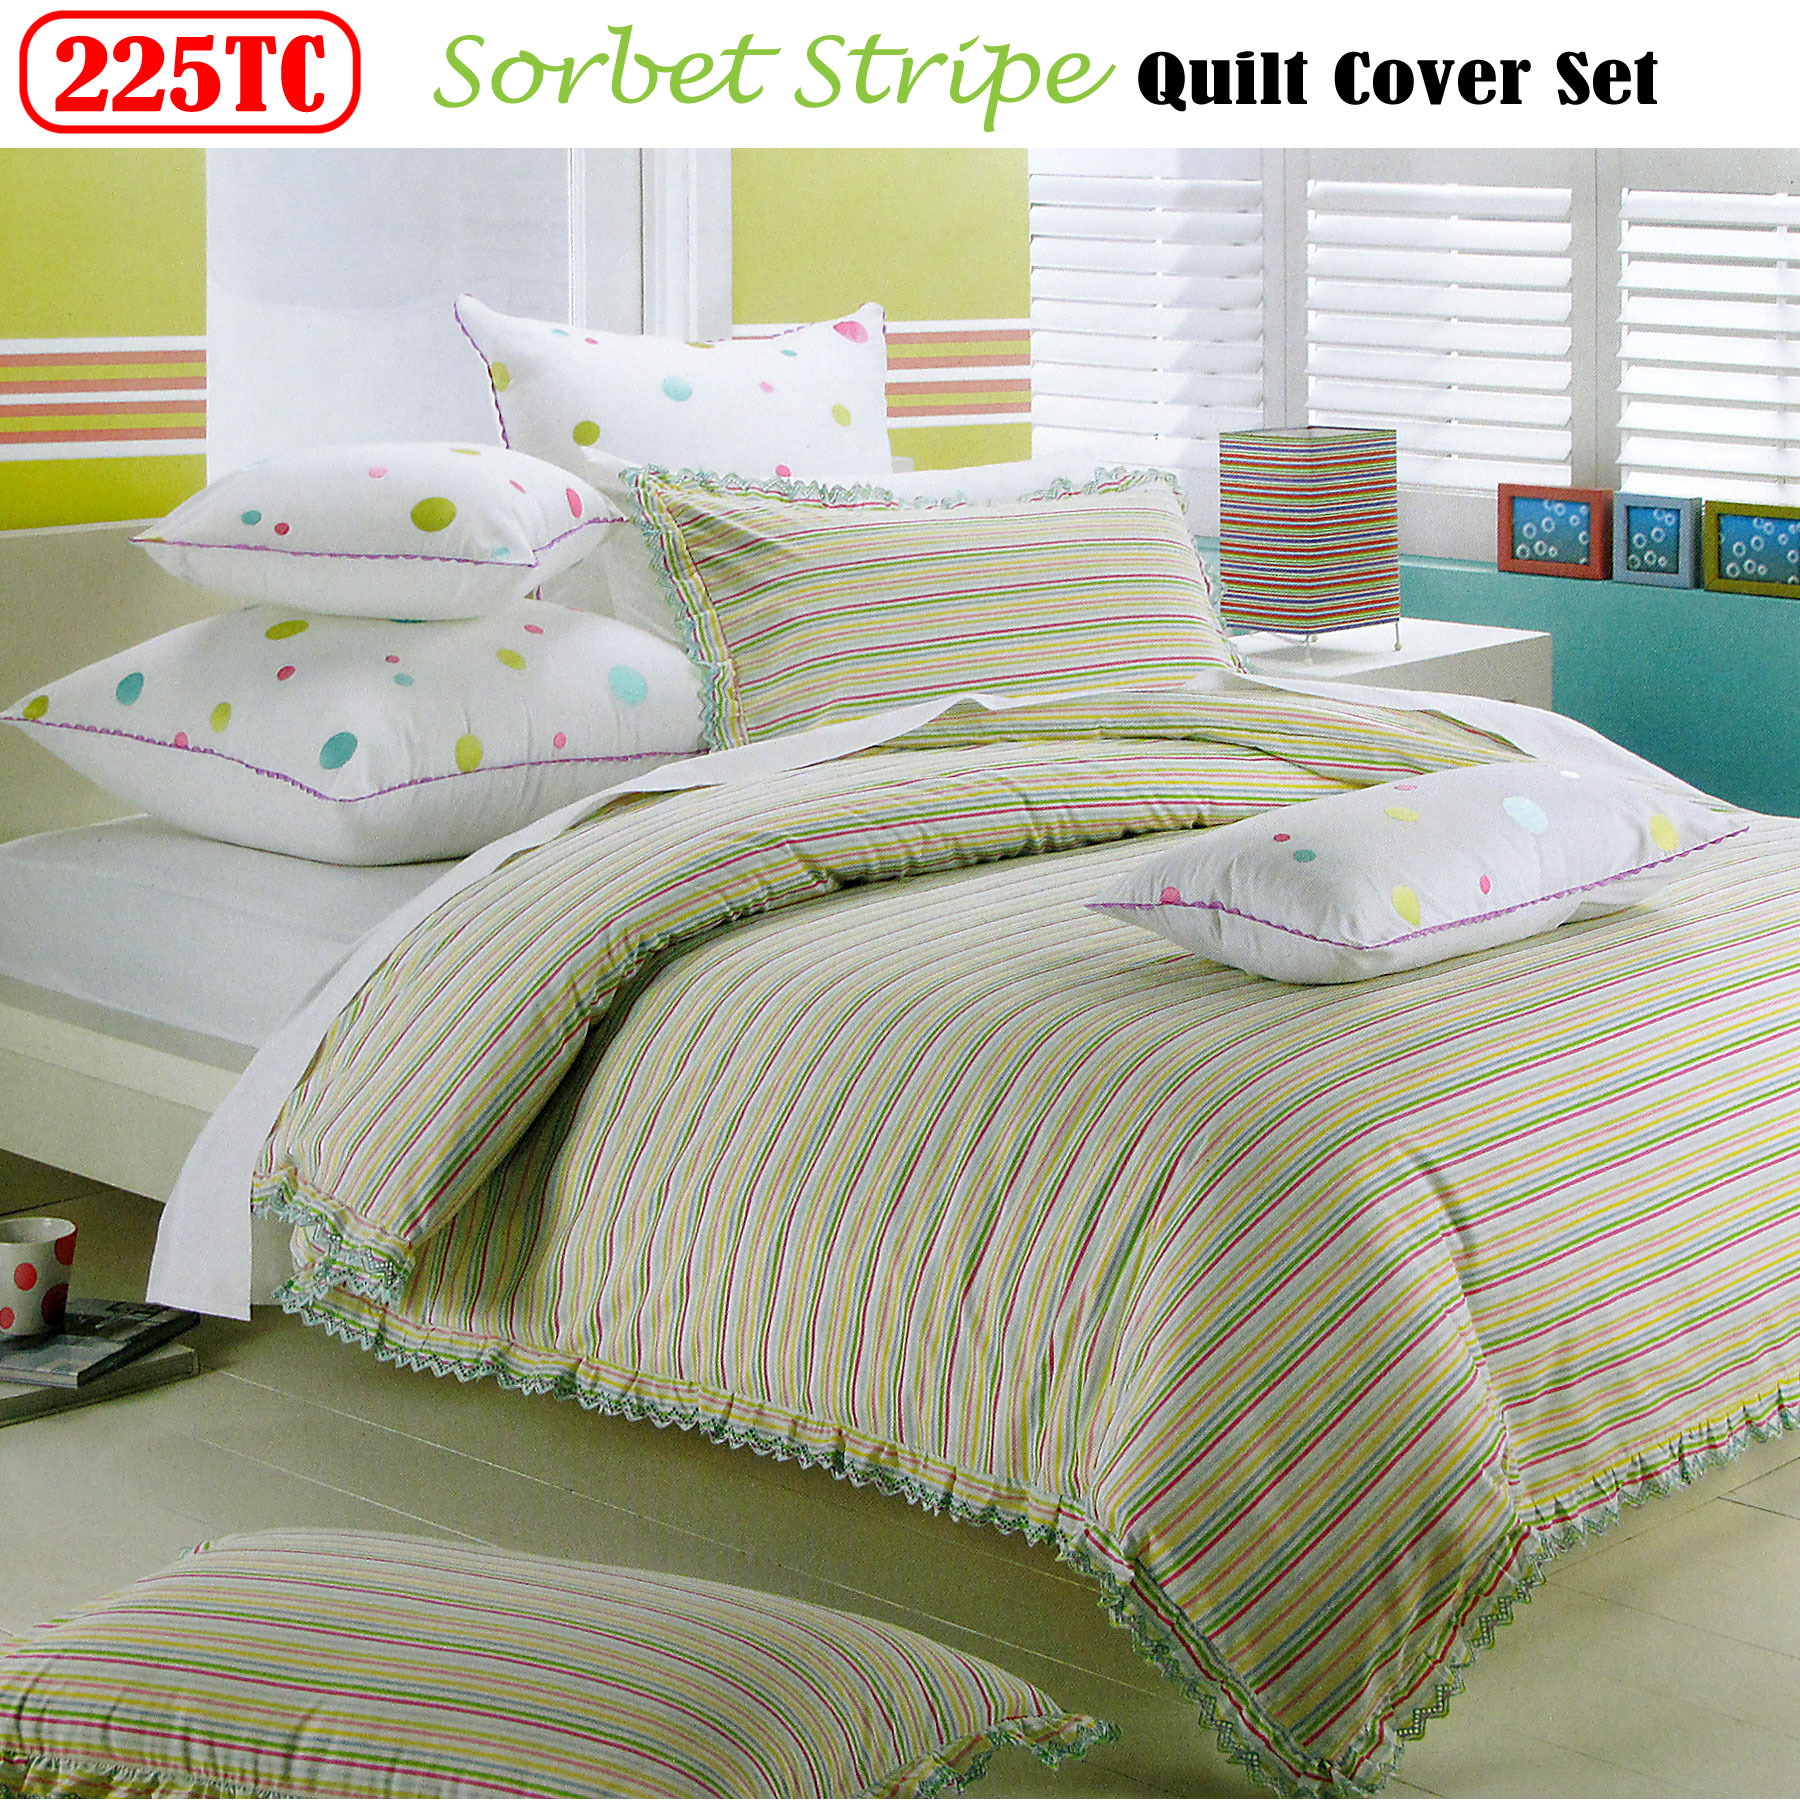 3 Pce Sorbet Stripe Embroidered Lace Quilt Cover Set King Ebay